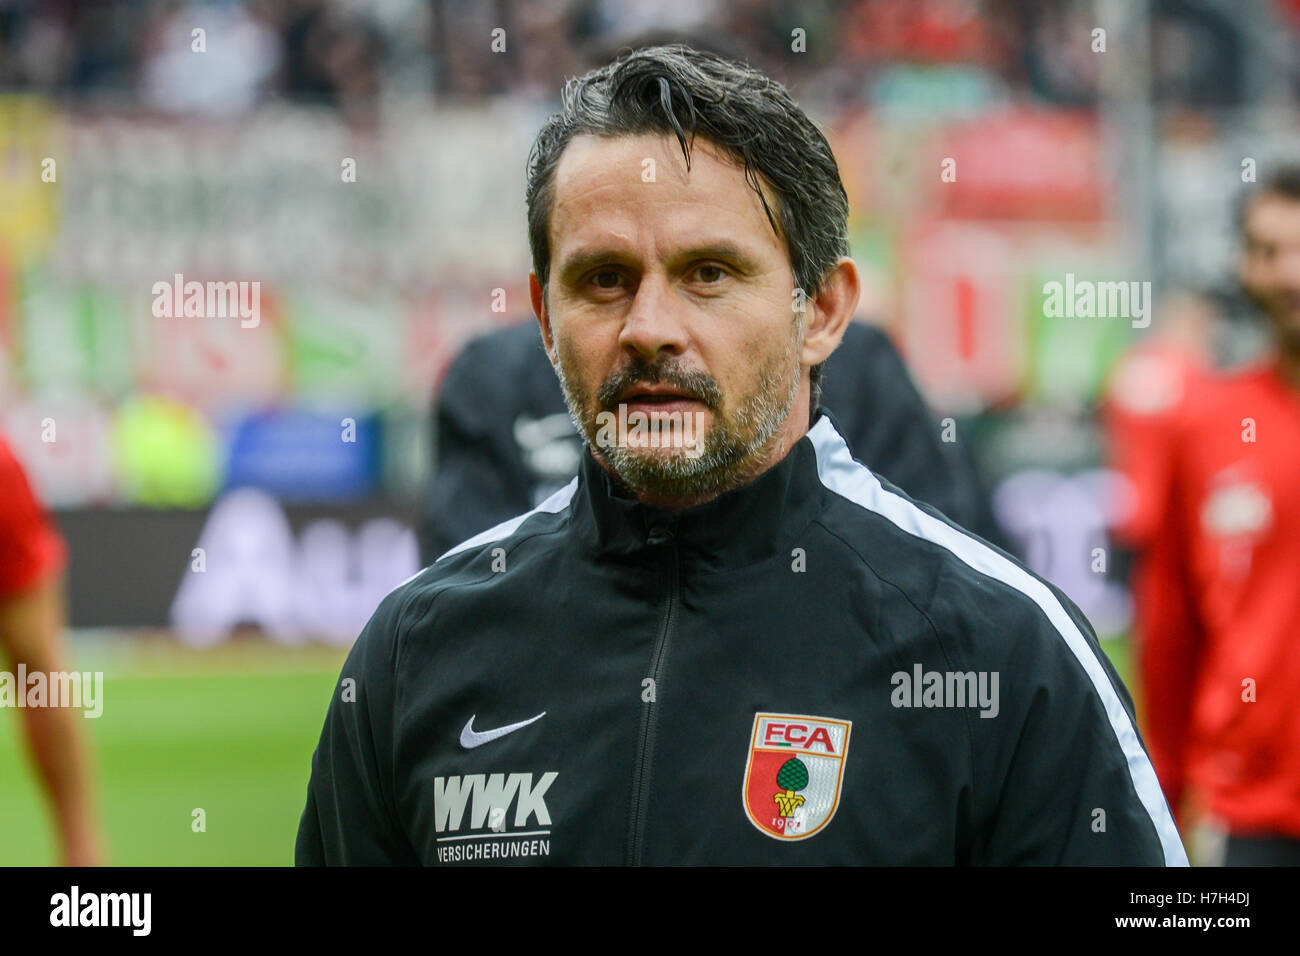 Ingolstadt, Germany. 5th Nov, 2016. Coach Dirk Schuster of Augsburg stands in the stadium before the soccer match between FC Ingolstadt o4 and FC Augsburg on the tenth match day of the Bundesliga at Audi Sportpark in Ingolstadt, Germany, 5 November 2016. PHOTO: ARMIN WEIGEL/dpa (ATTENTION: Due to the accreditation guidelines, the DFL only permits the publication and utilisation of up to 15 pictures per match on the internet and in online media during the match.) Credit:  dpa/Alamy Live News Stock Photo